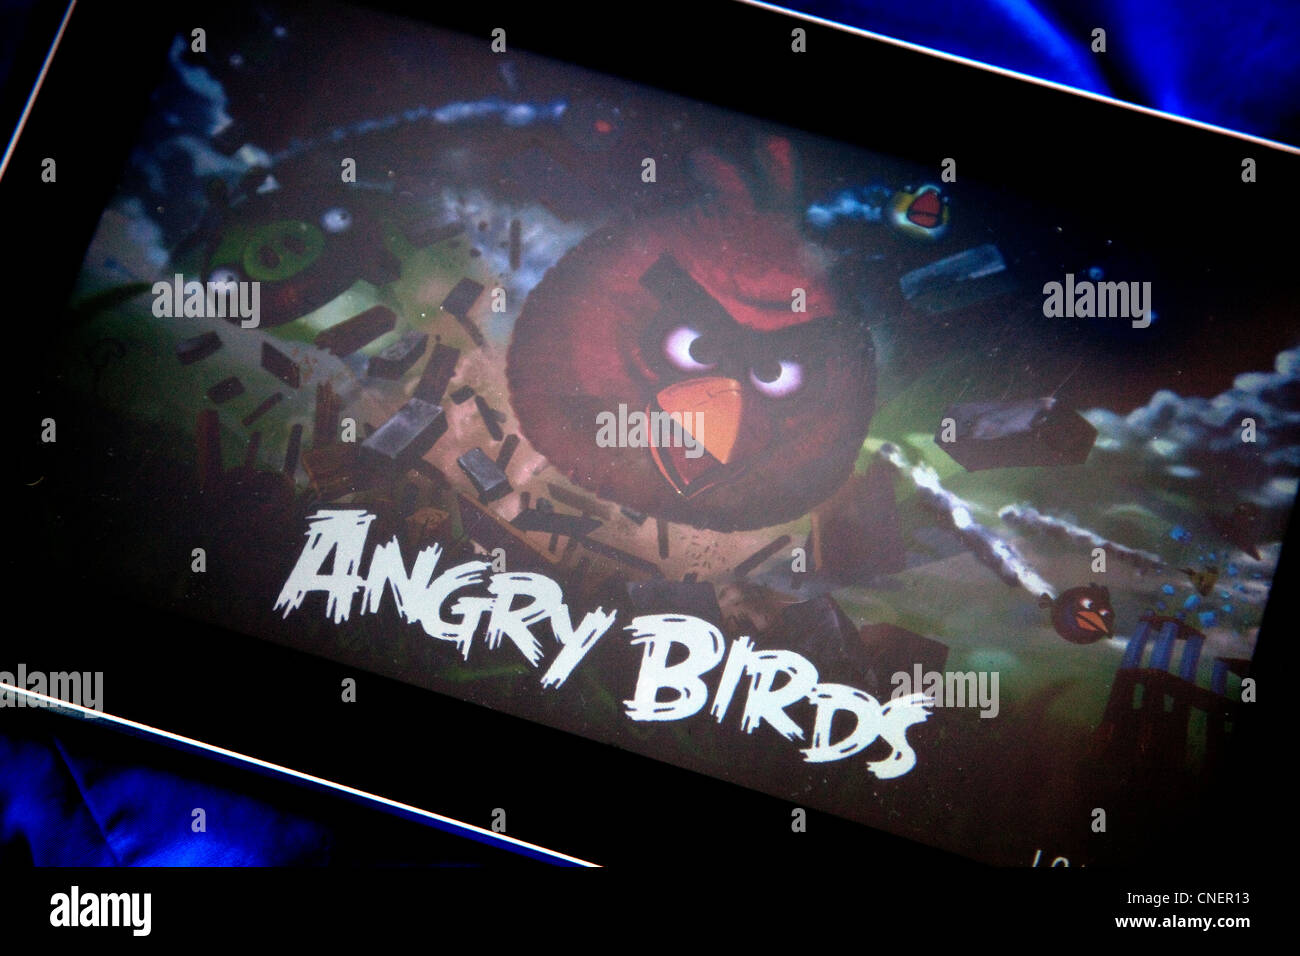 Angry Birds game on tablet device, London Stock Photo